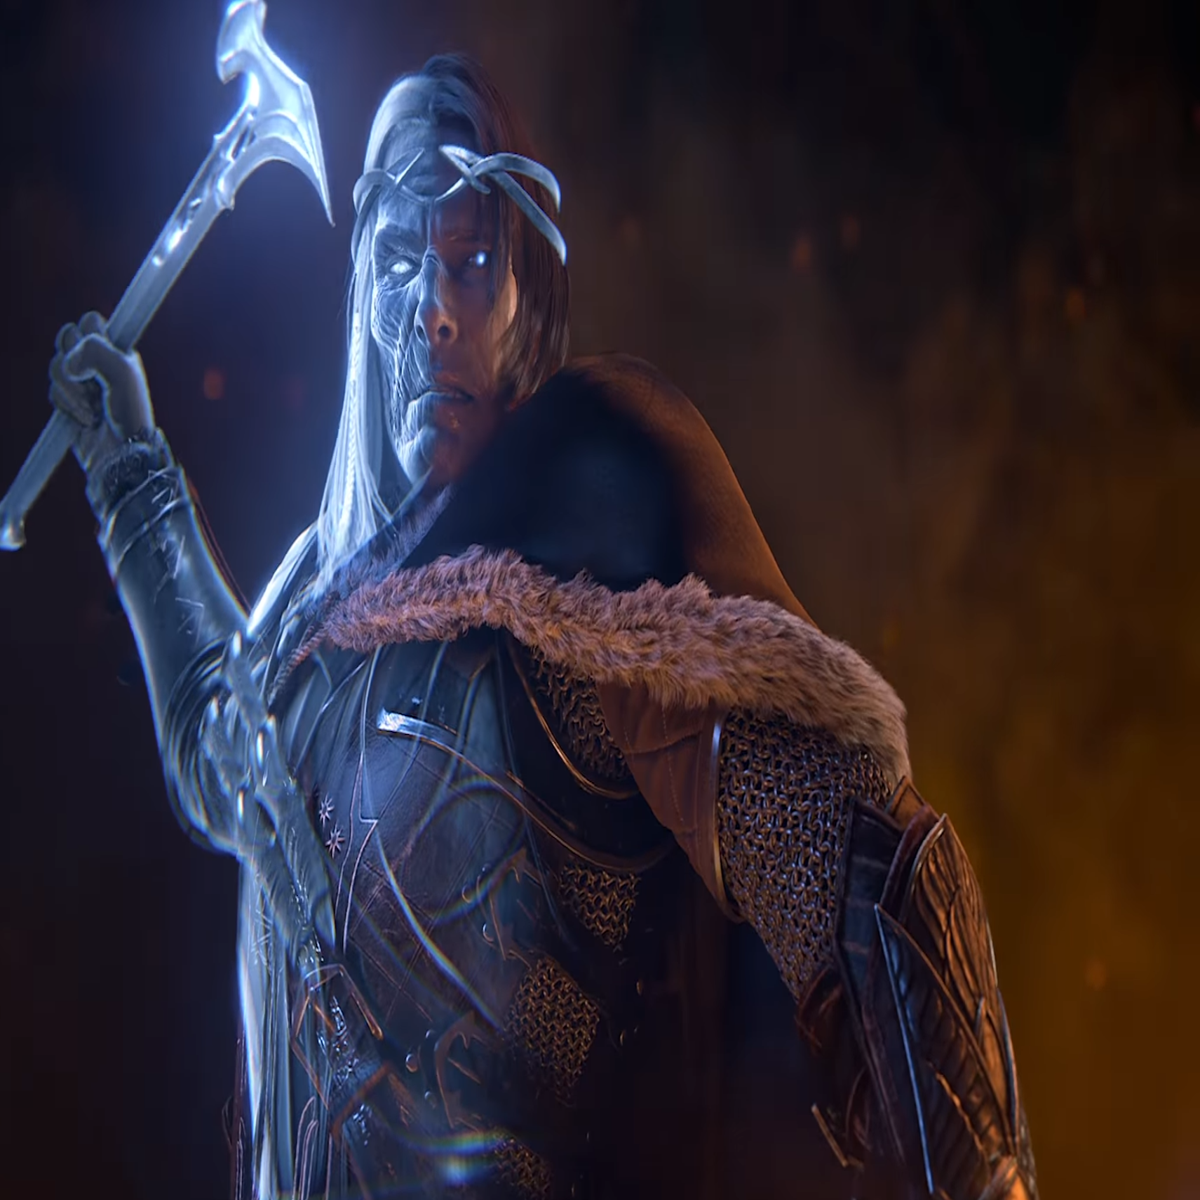 First Gameplay Demo For 'Shadow Of Mordor' Sequel 'Middle-earth: Shadow Of  War' Released